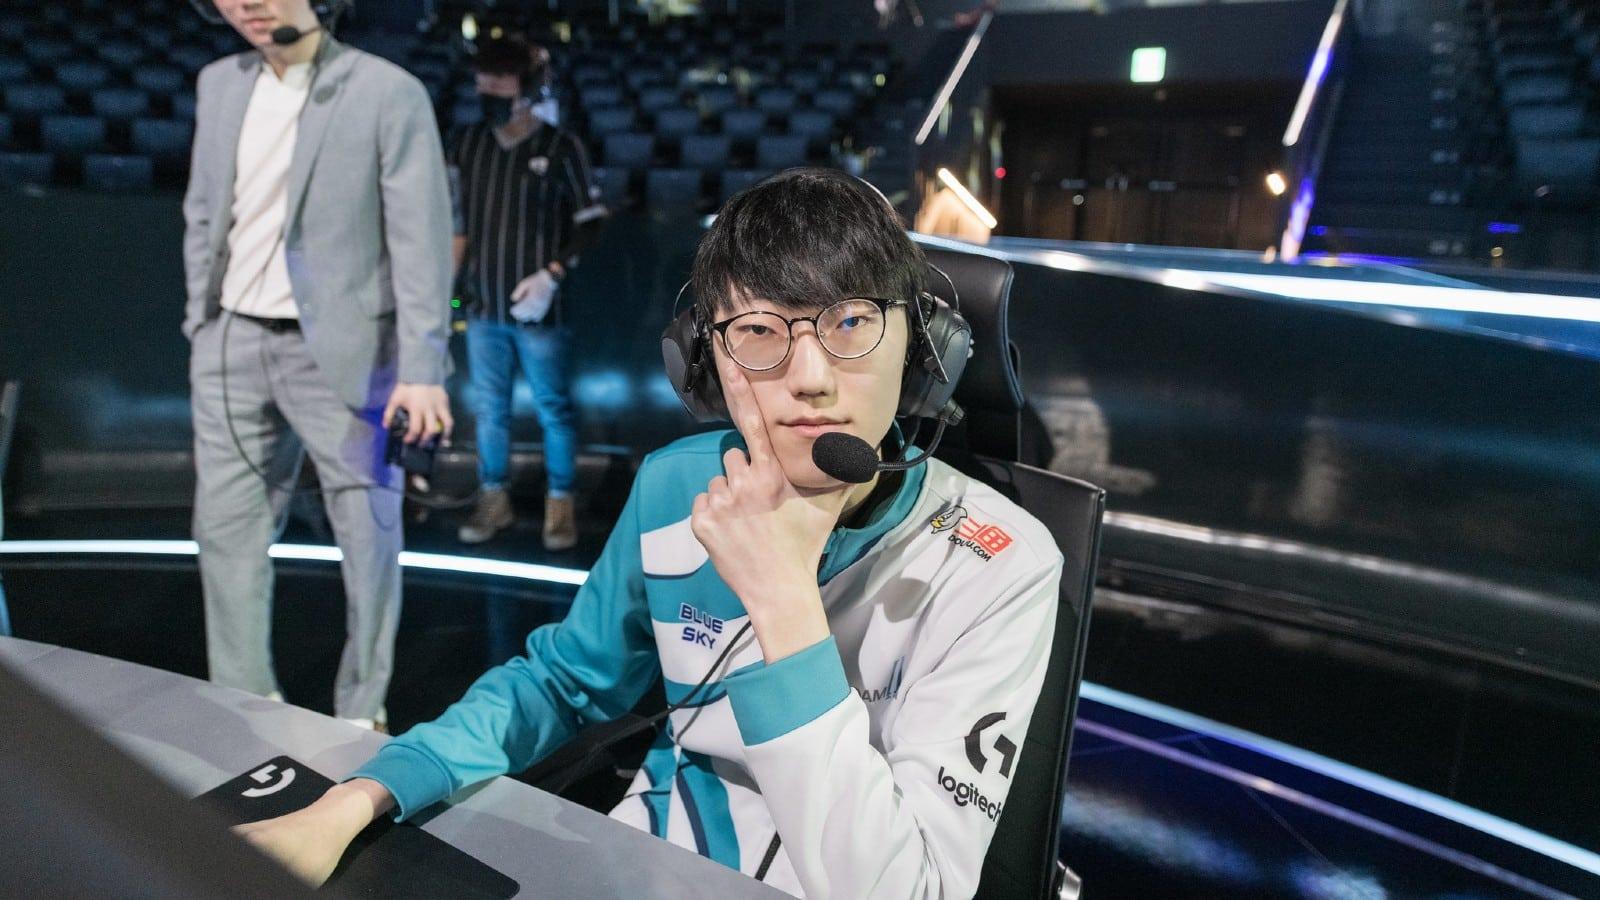 Faker turned down $20m per year LPL contract to stay with T1 - Dexerto